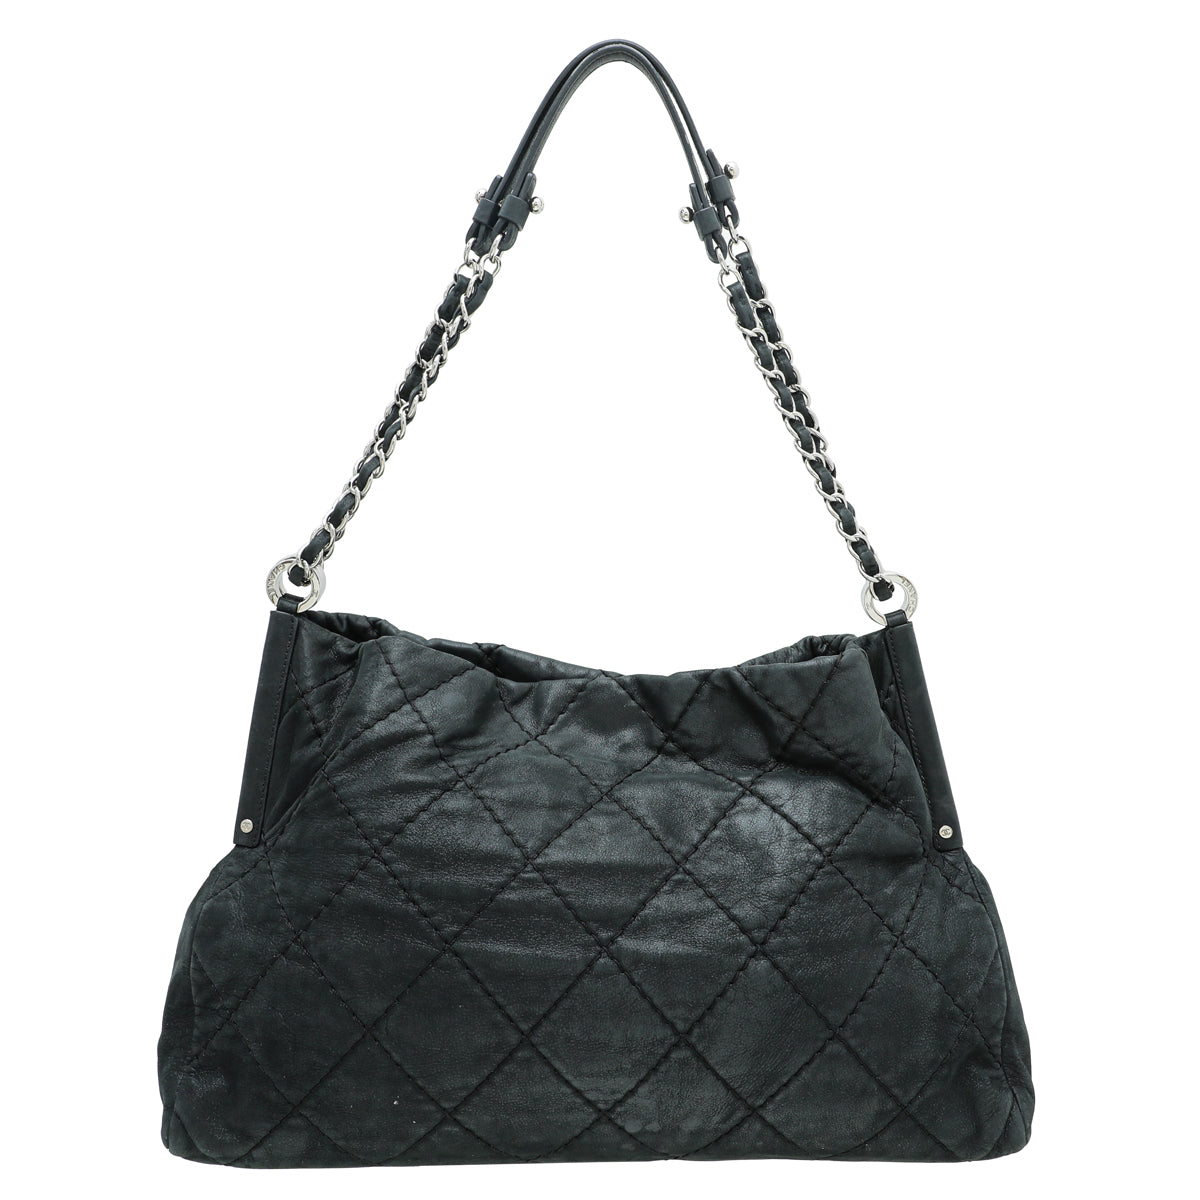 Chanel Black CC Iridescent Relax Tote Bag